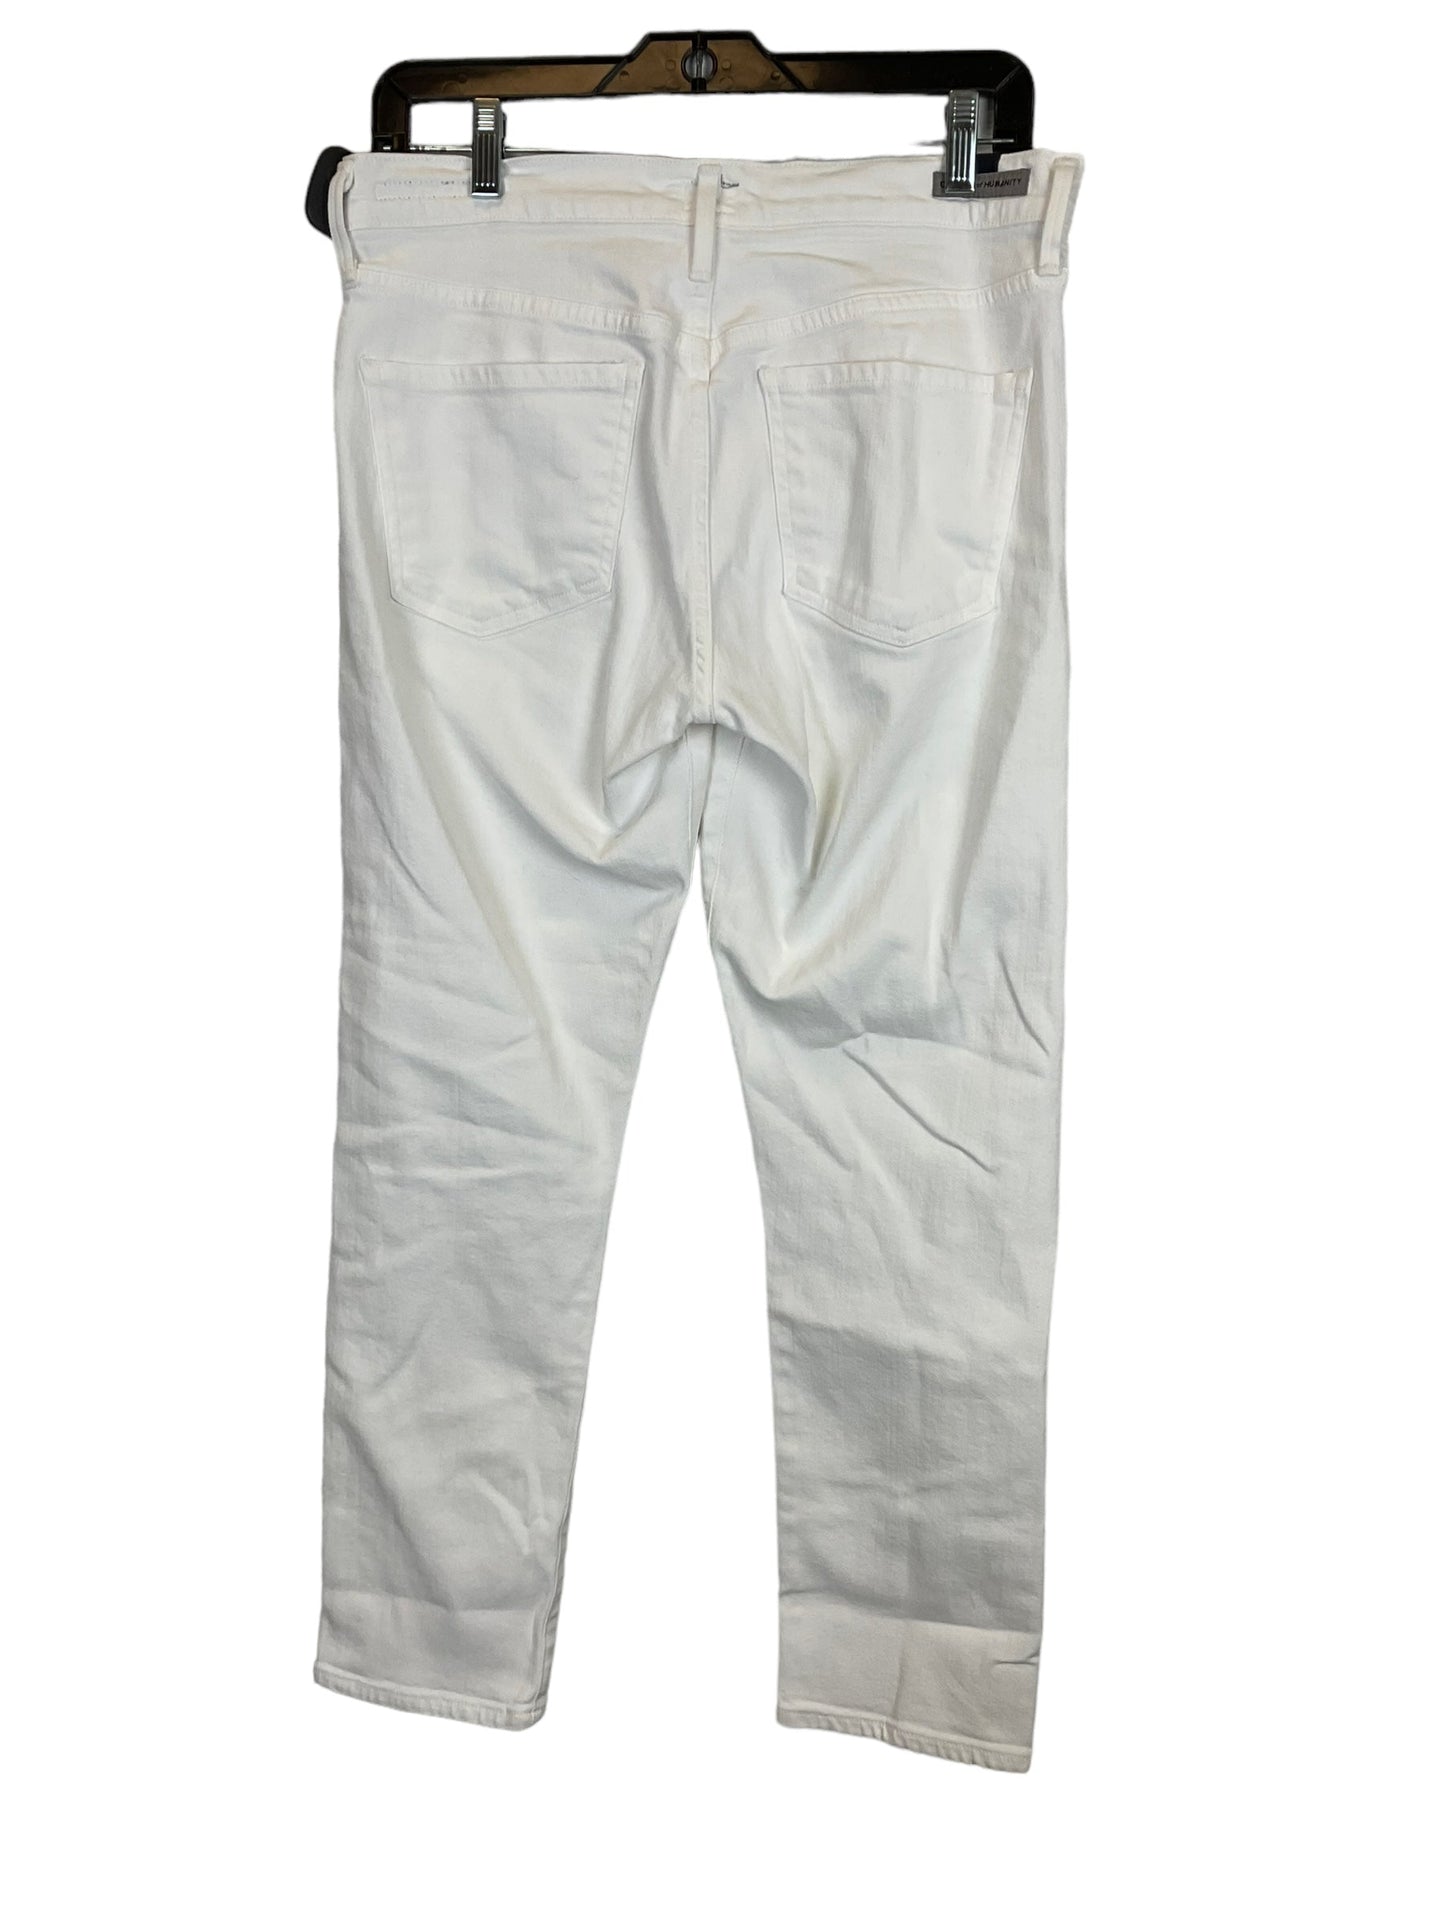 Pants Ankle By Citizens Of Humanity  Size: 4